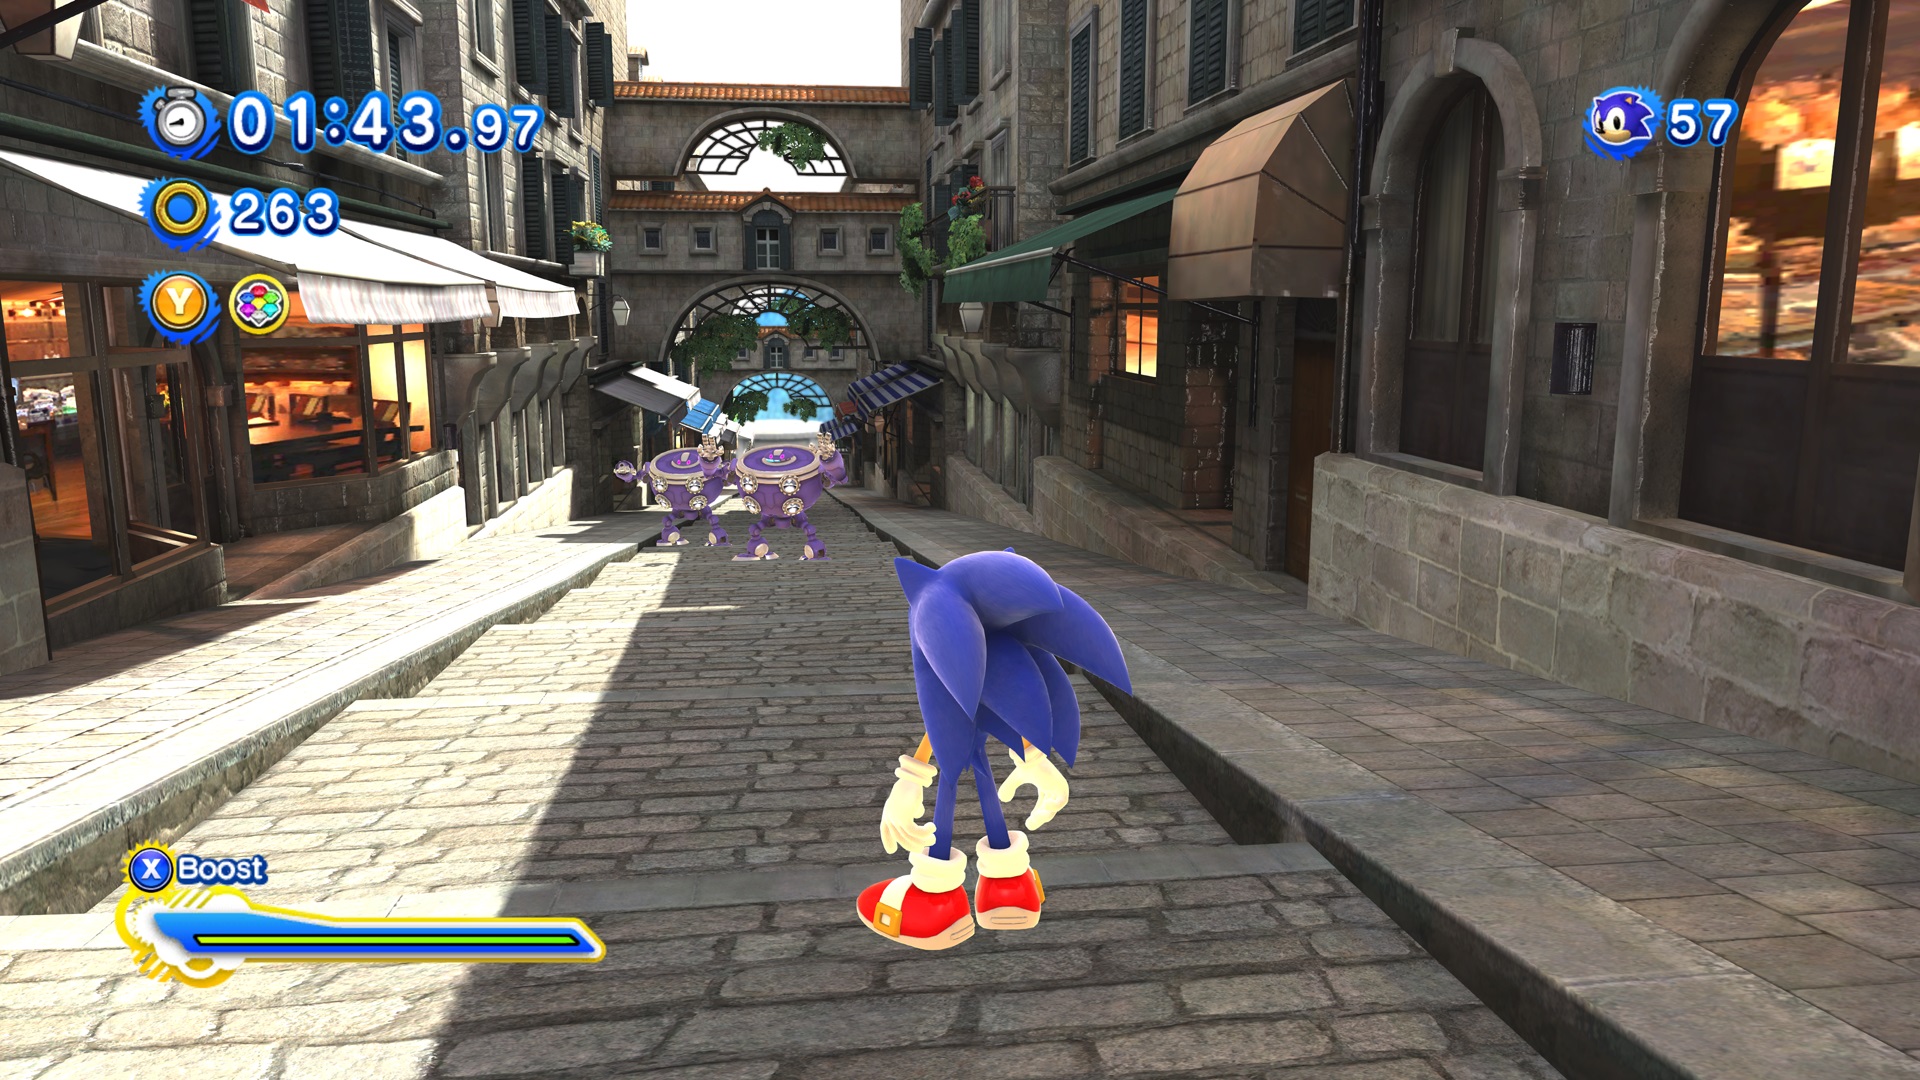 download sonic games for free for pc